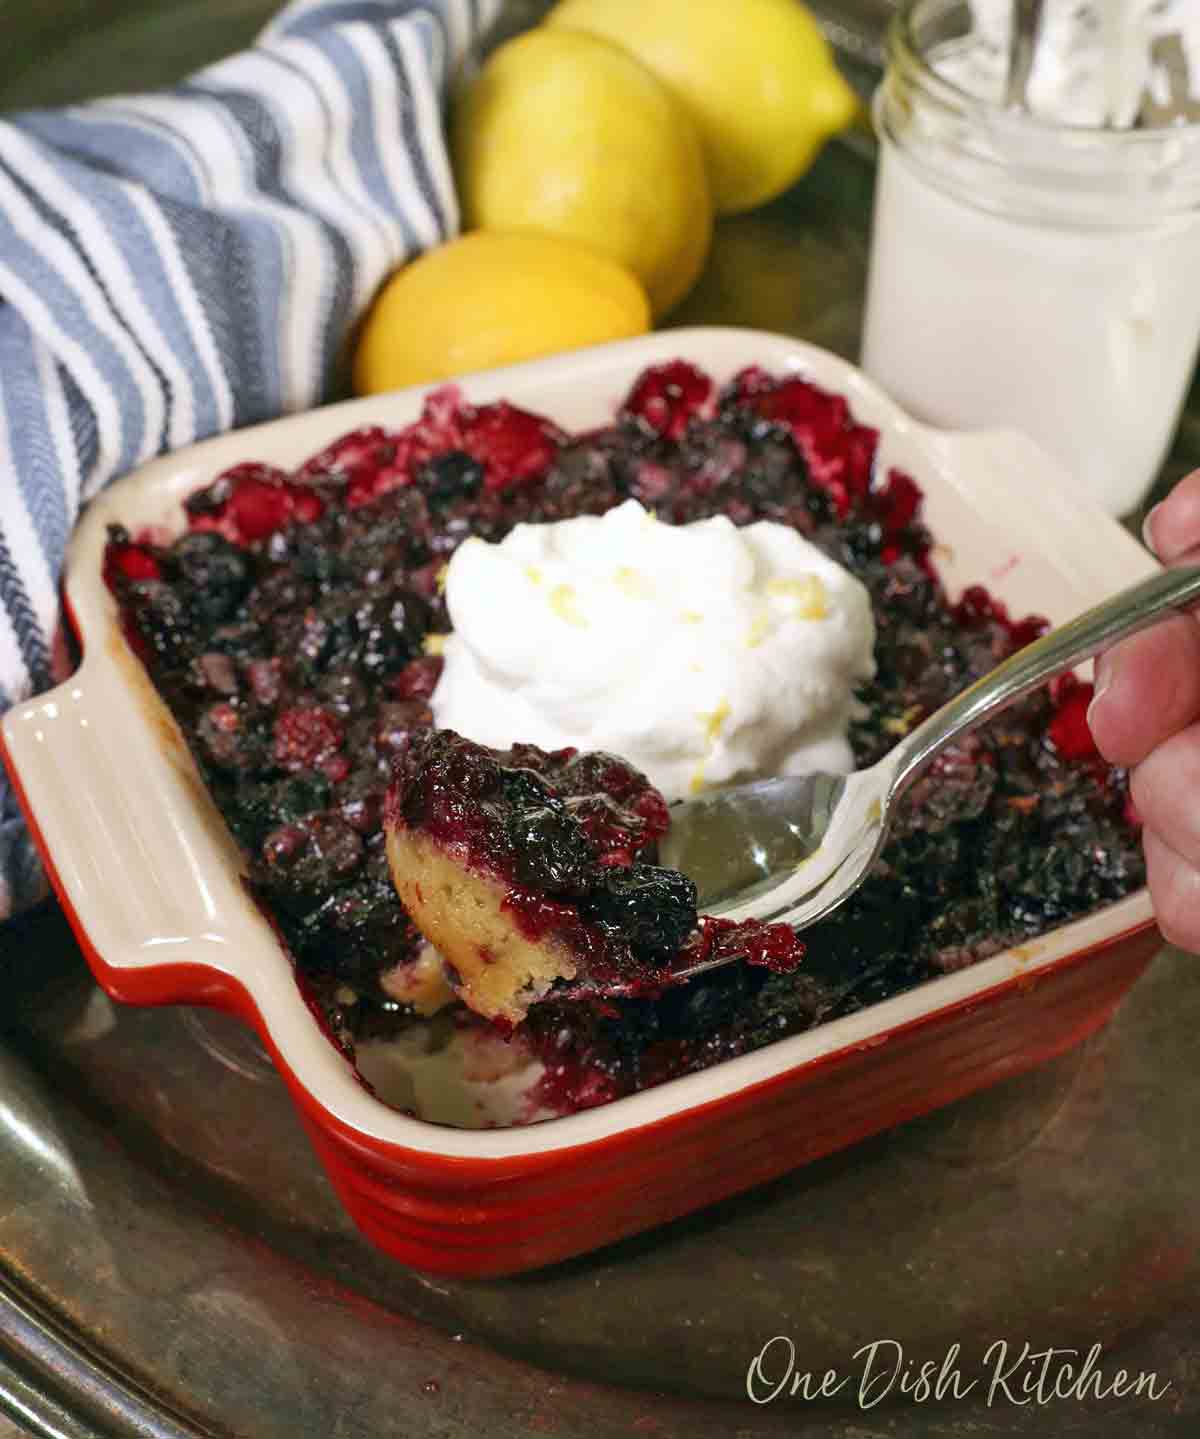 a mini blueberry pie topped with whipped cream in a square red baking dish next to a blue dish towel and 3 lemons.